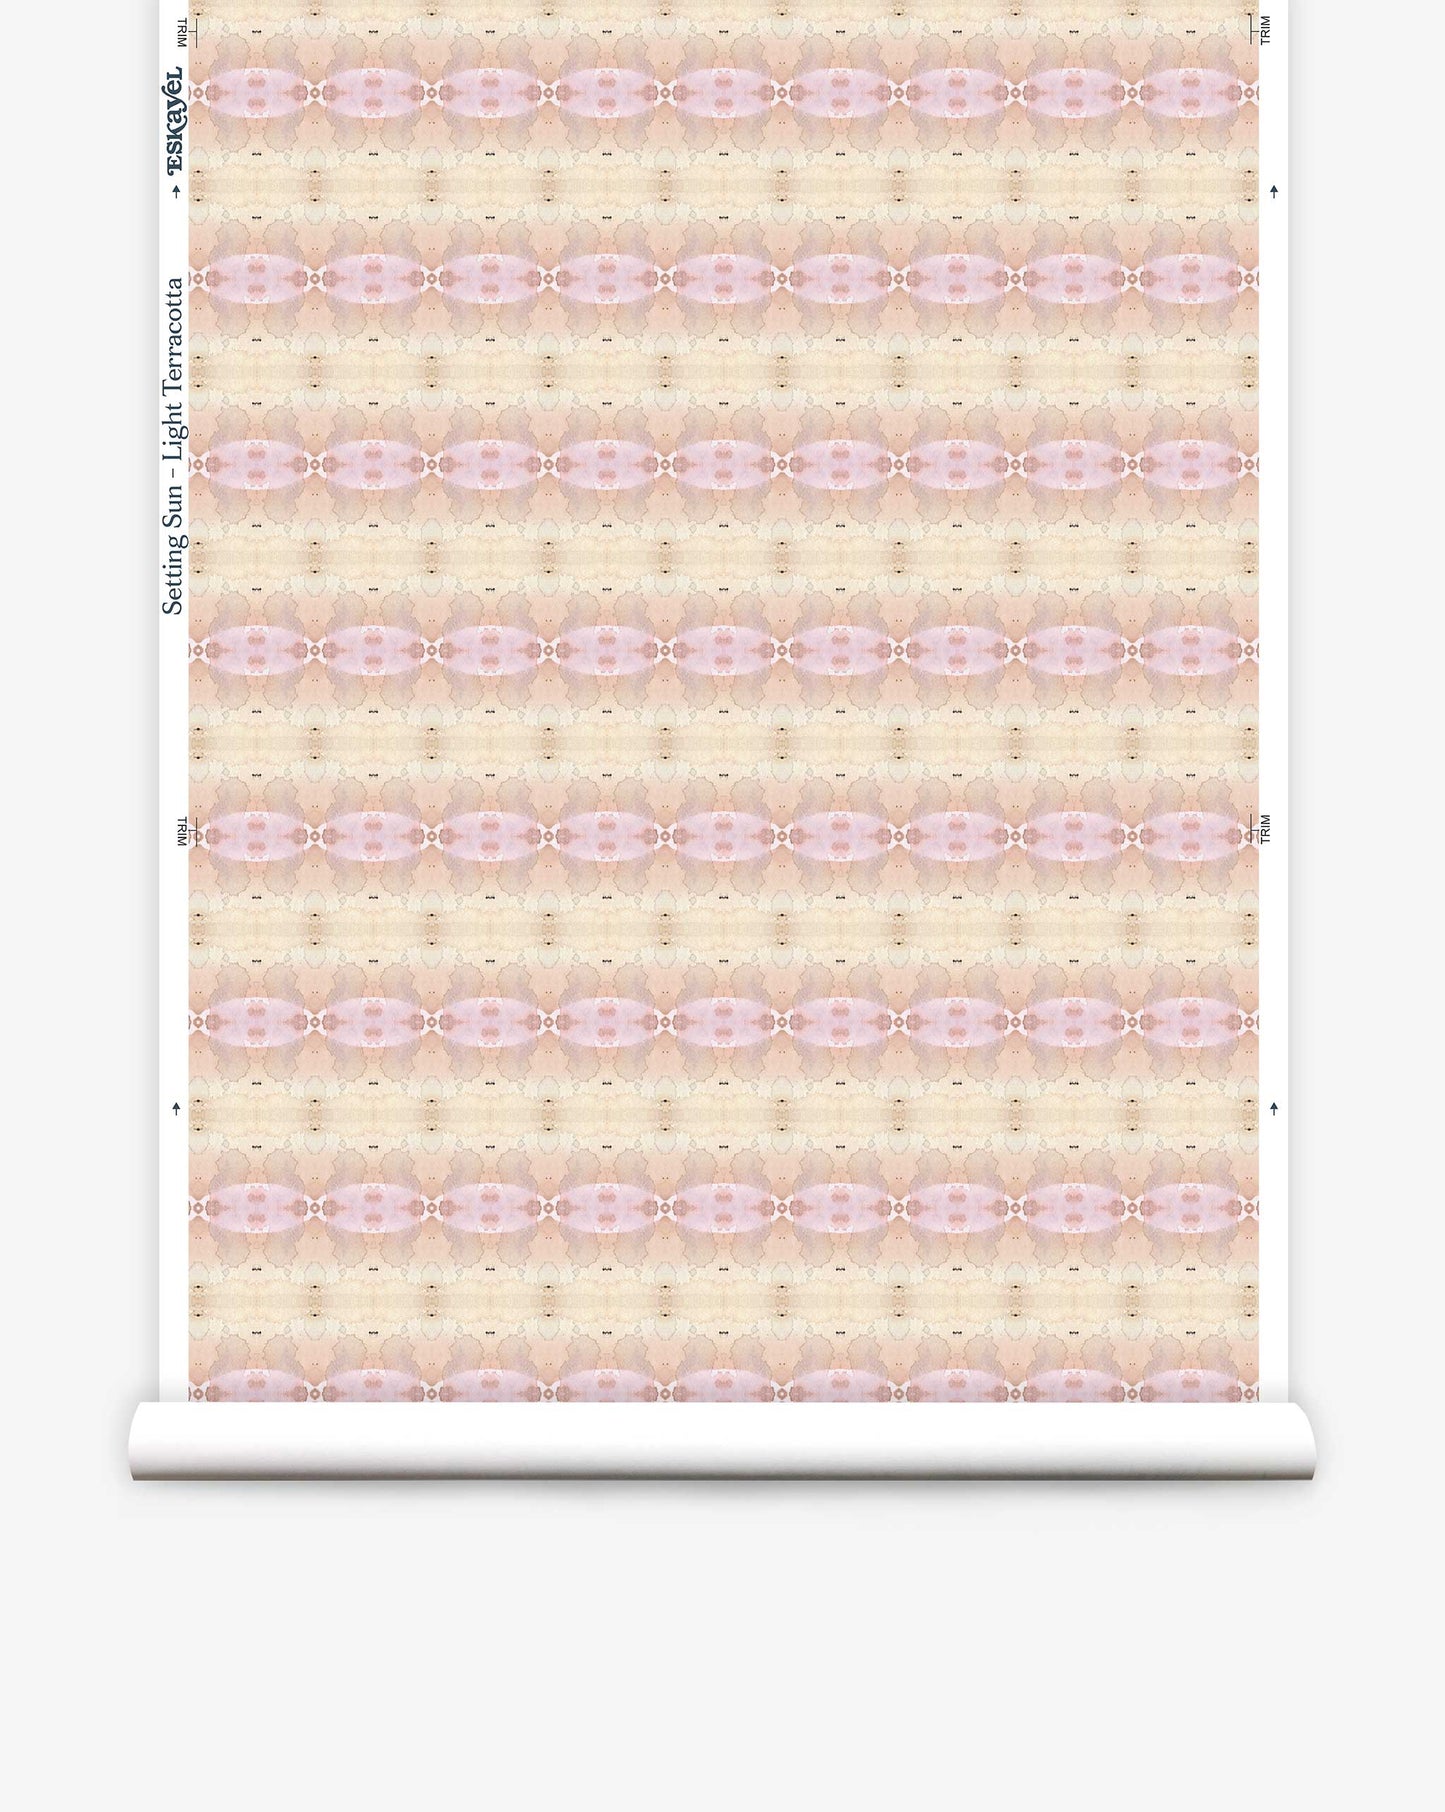 A roll of Setting Sun Wallpaper||Light Terracotta with a repeating pattern in soft pink and Light Terracotta tones is shown.